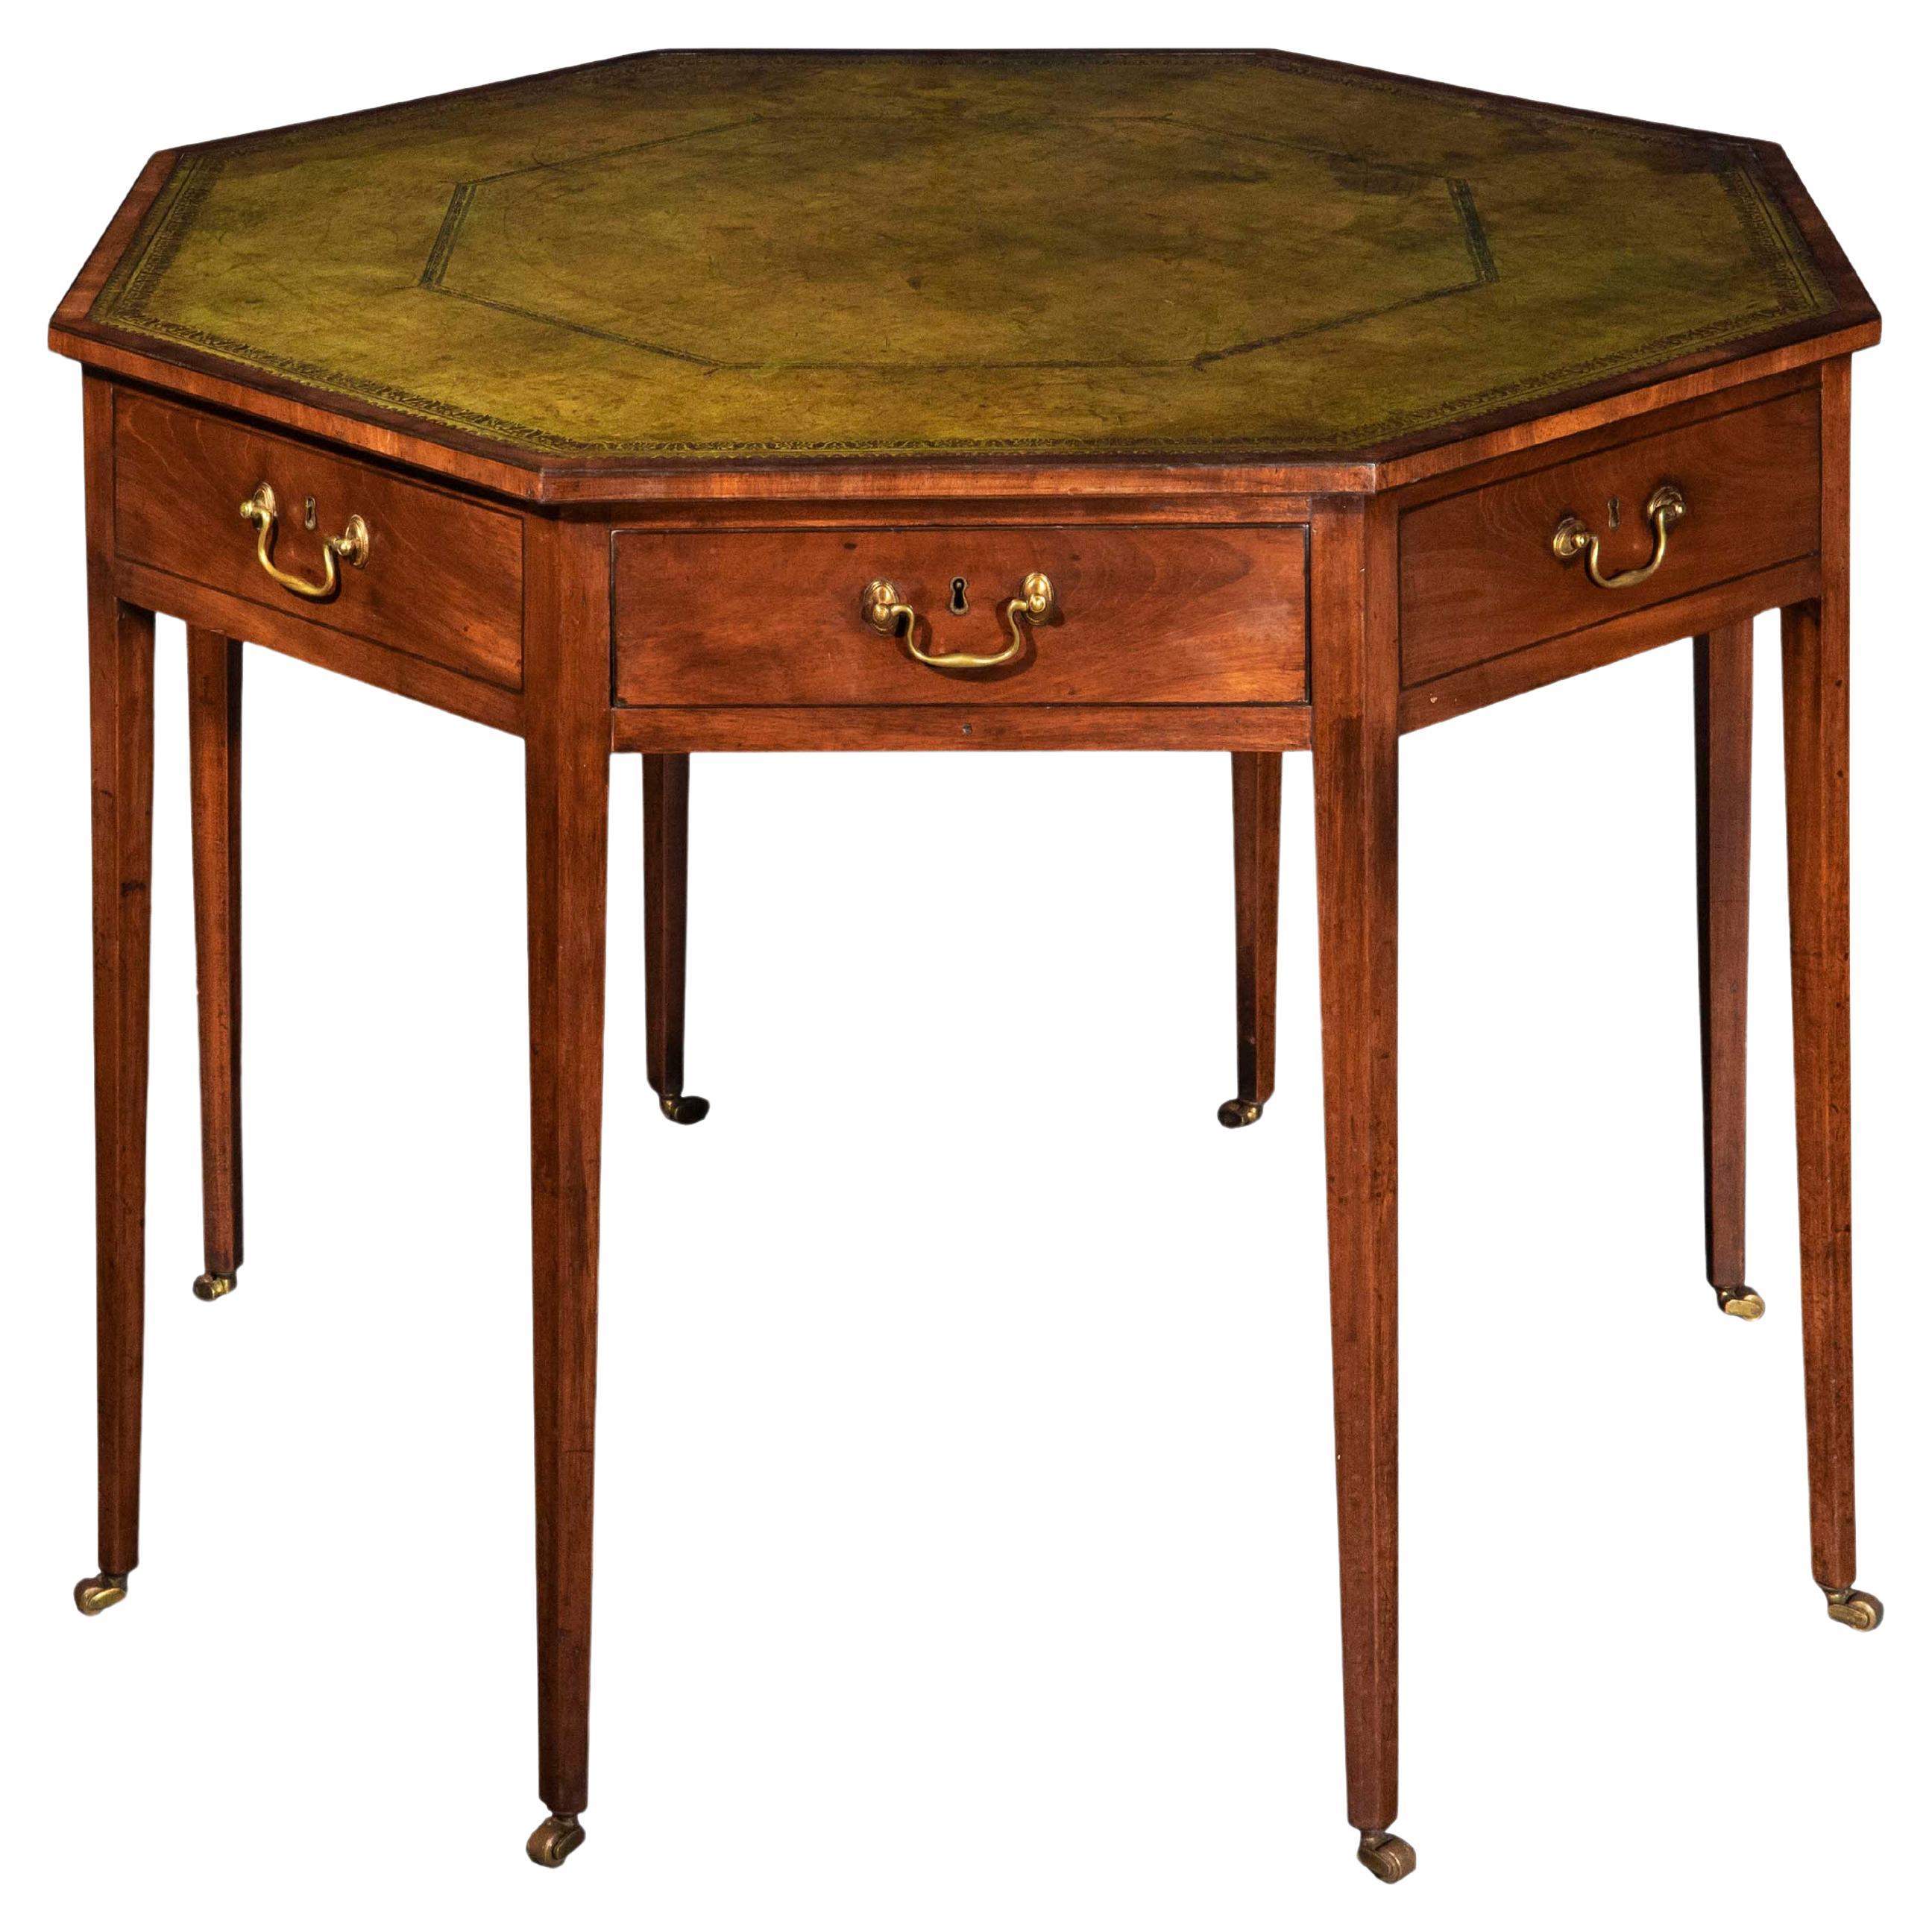 Georgian Regency Octagonal Library Table with Green Leather Top